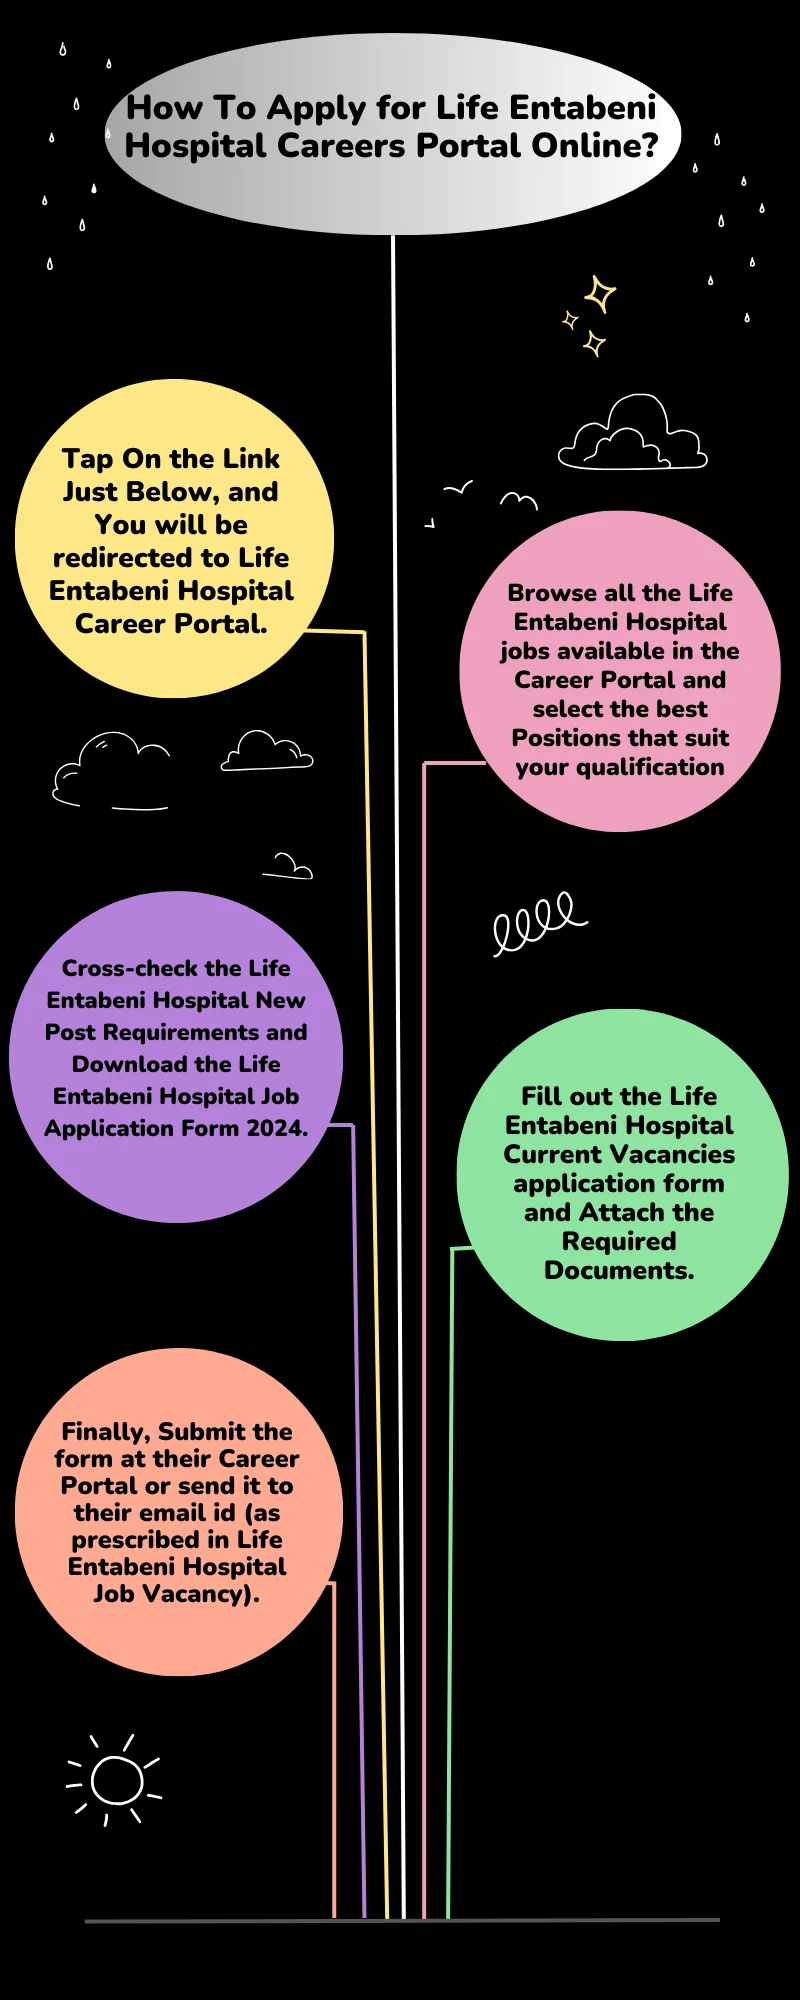 How To Apply for Life Entabeni Hospital Careers Portal Online?